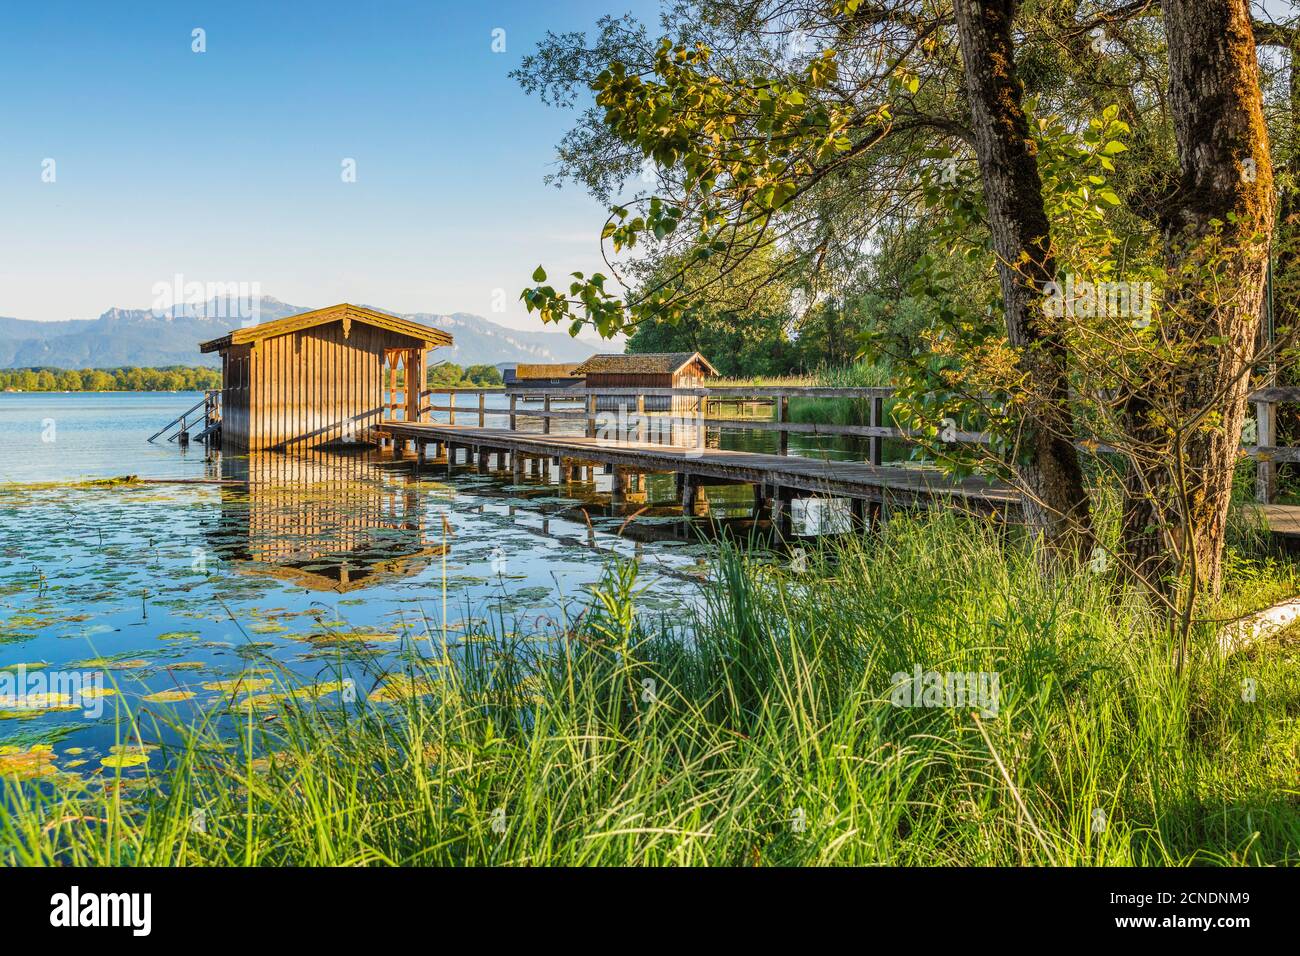 Boat houses on a jetty, Lake Chiemsee, Upper Bavaria, Germany, Europe Stock Photo